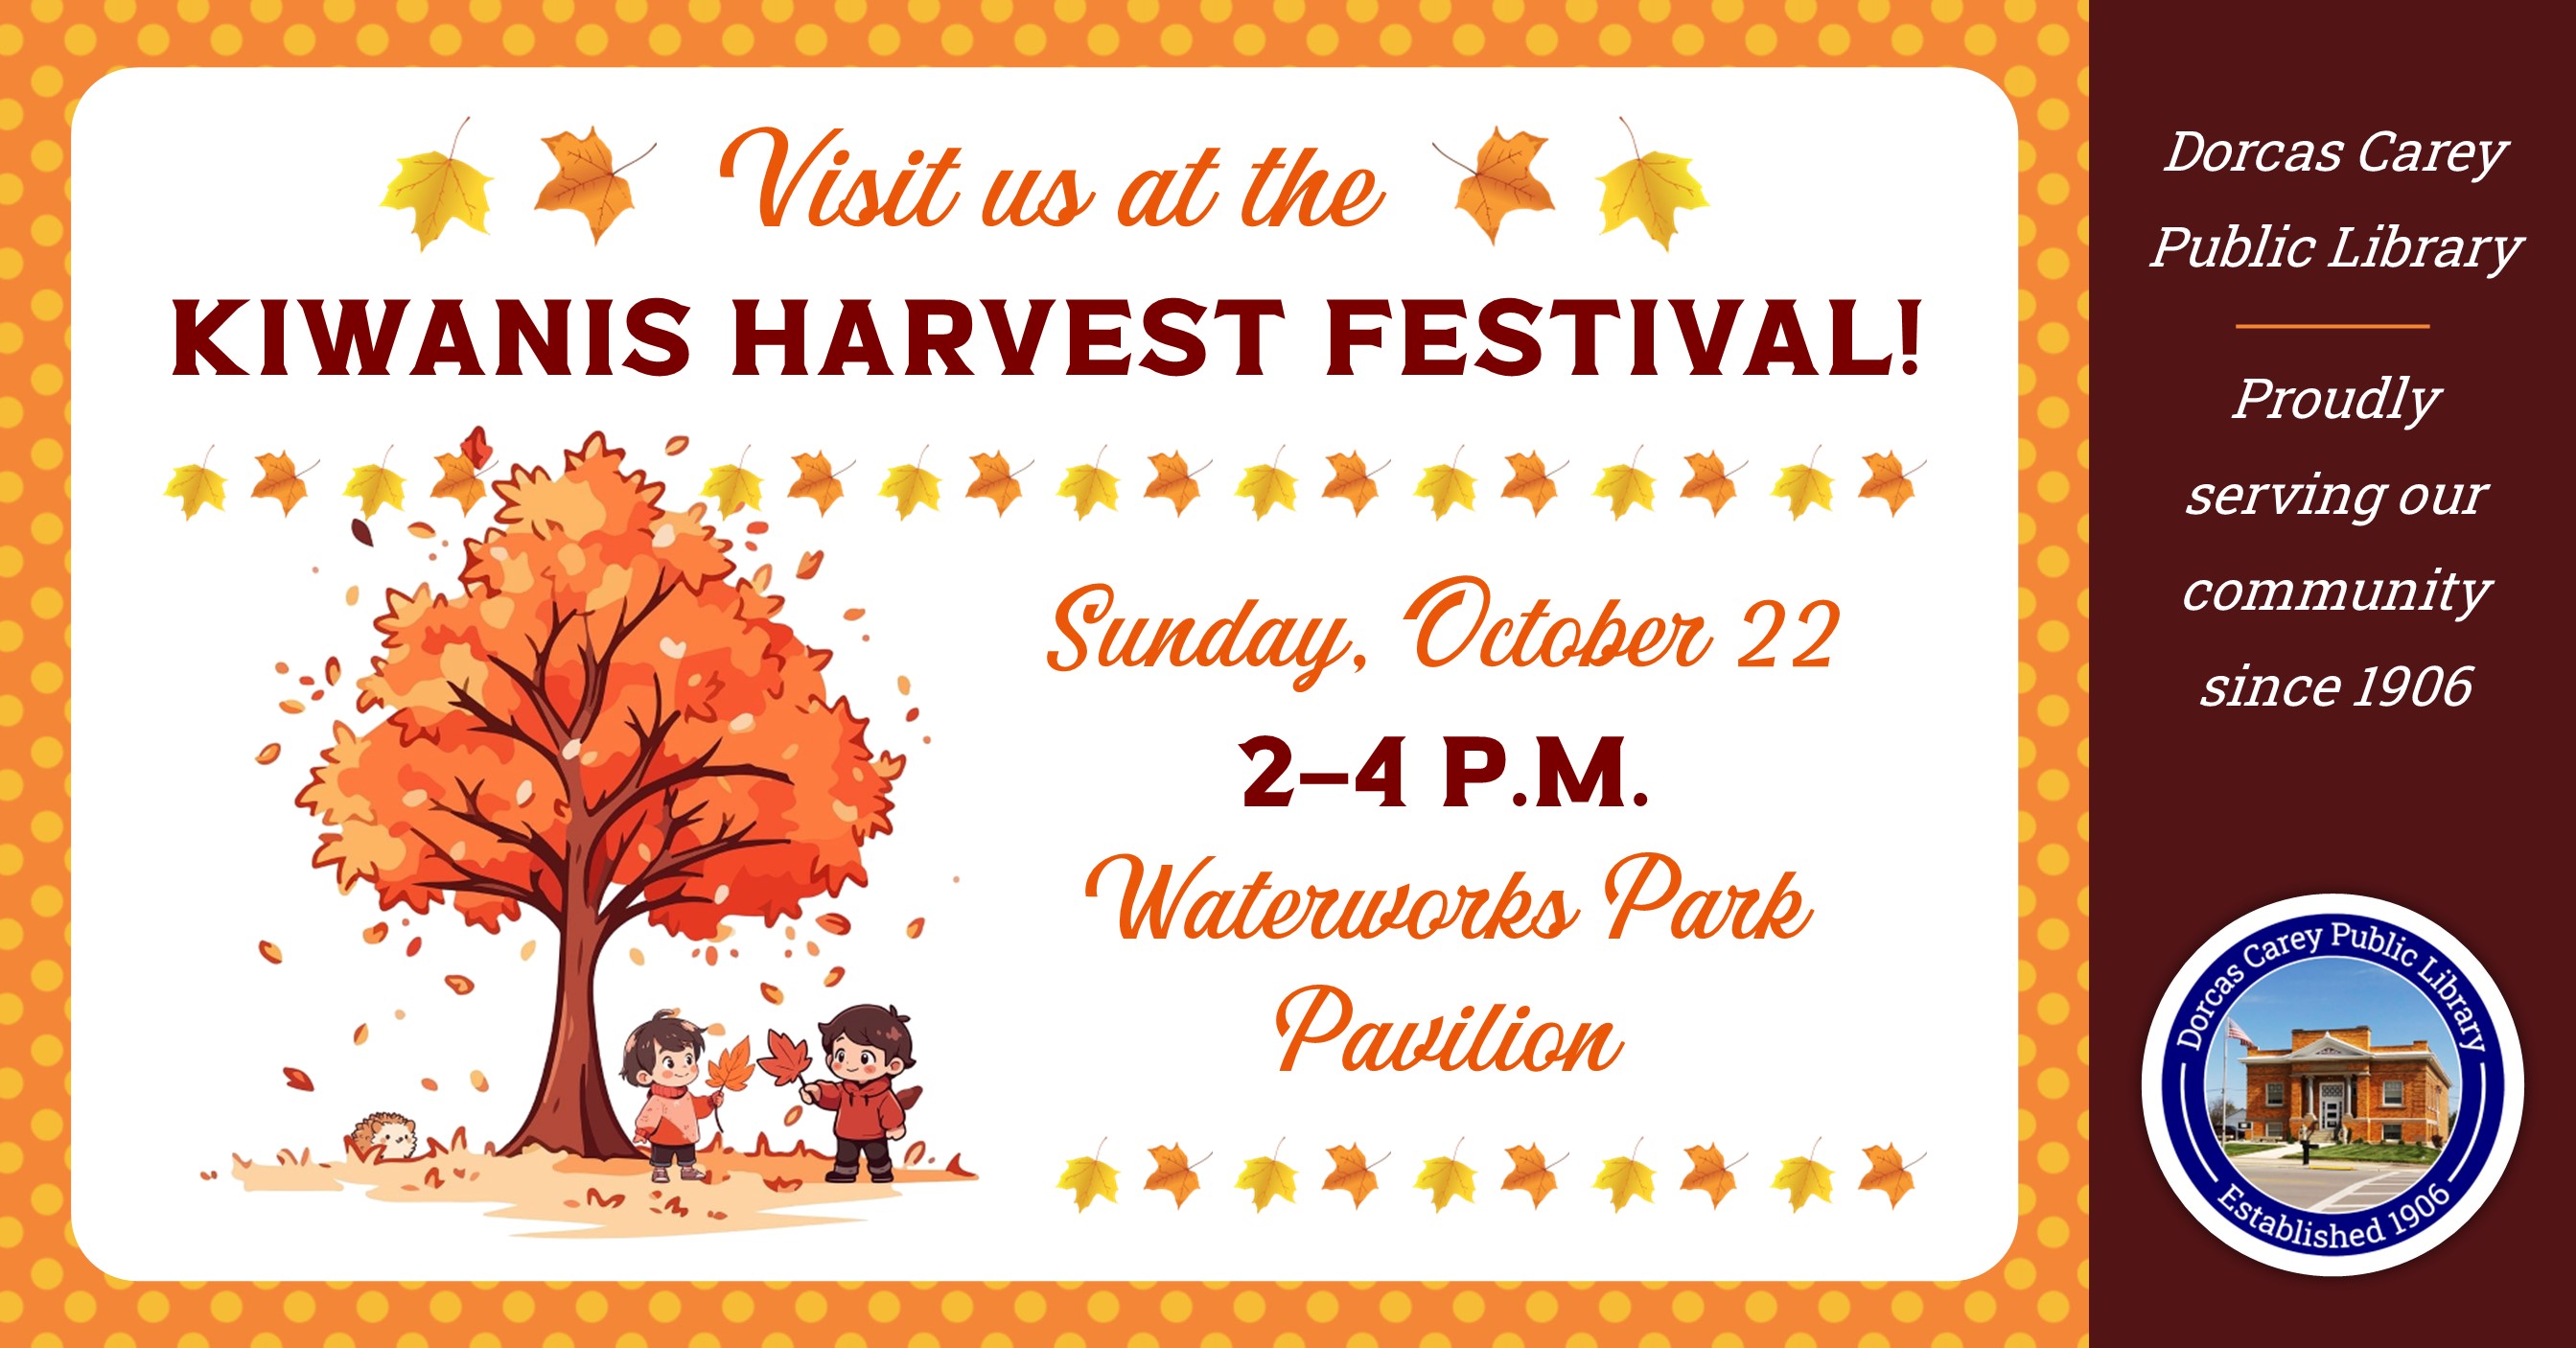 Join us at the Waterworks Park for the Kiwanis Fall Festival - fun for all!